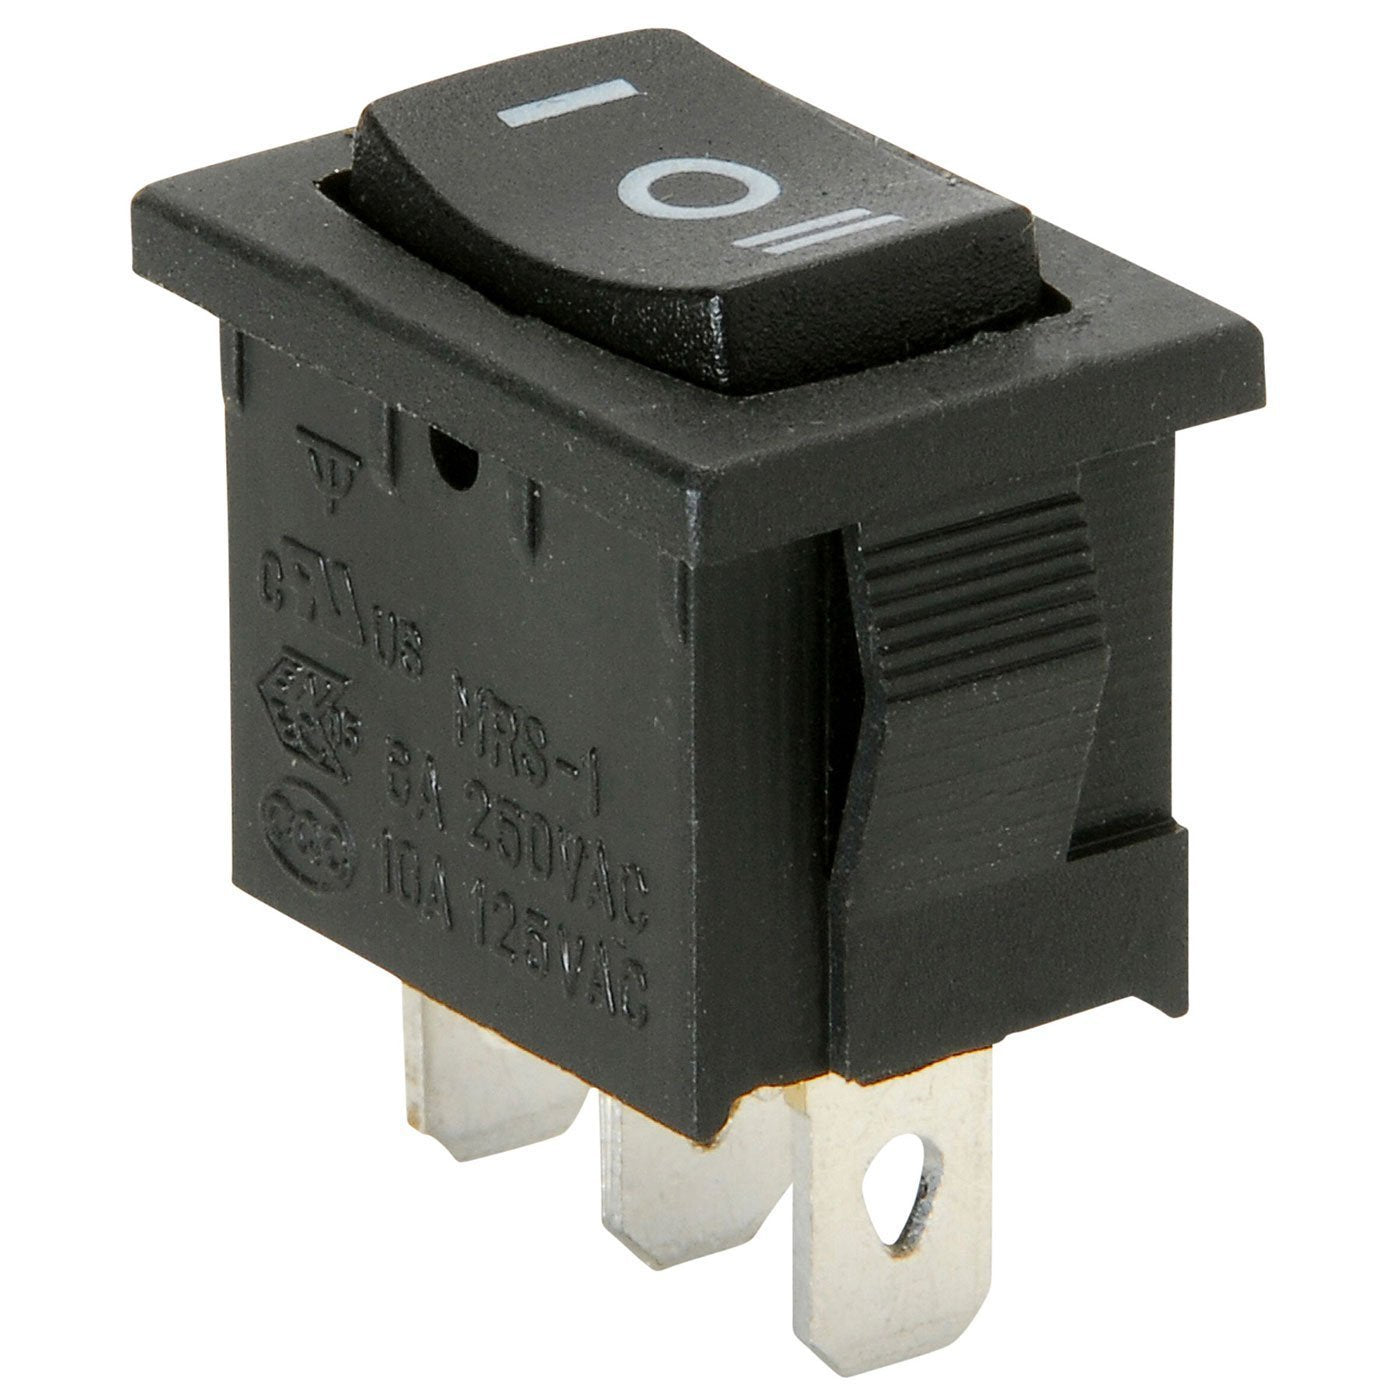 2 Pack - Parts Express Rocker (Momentary) Switch Center Off